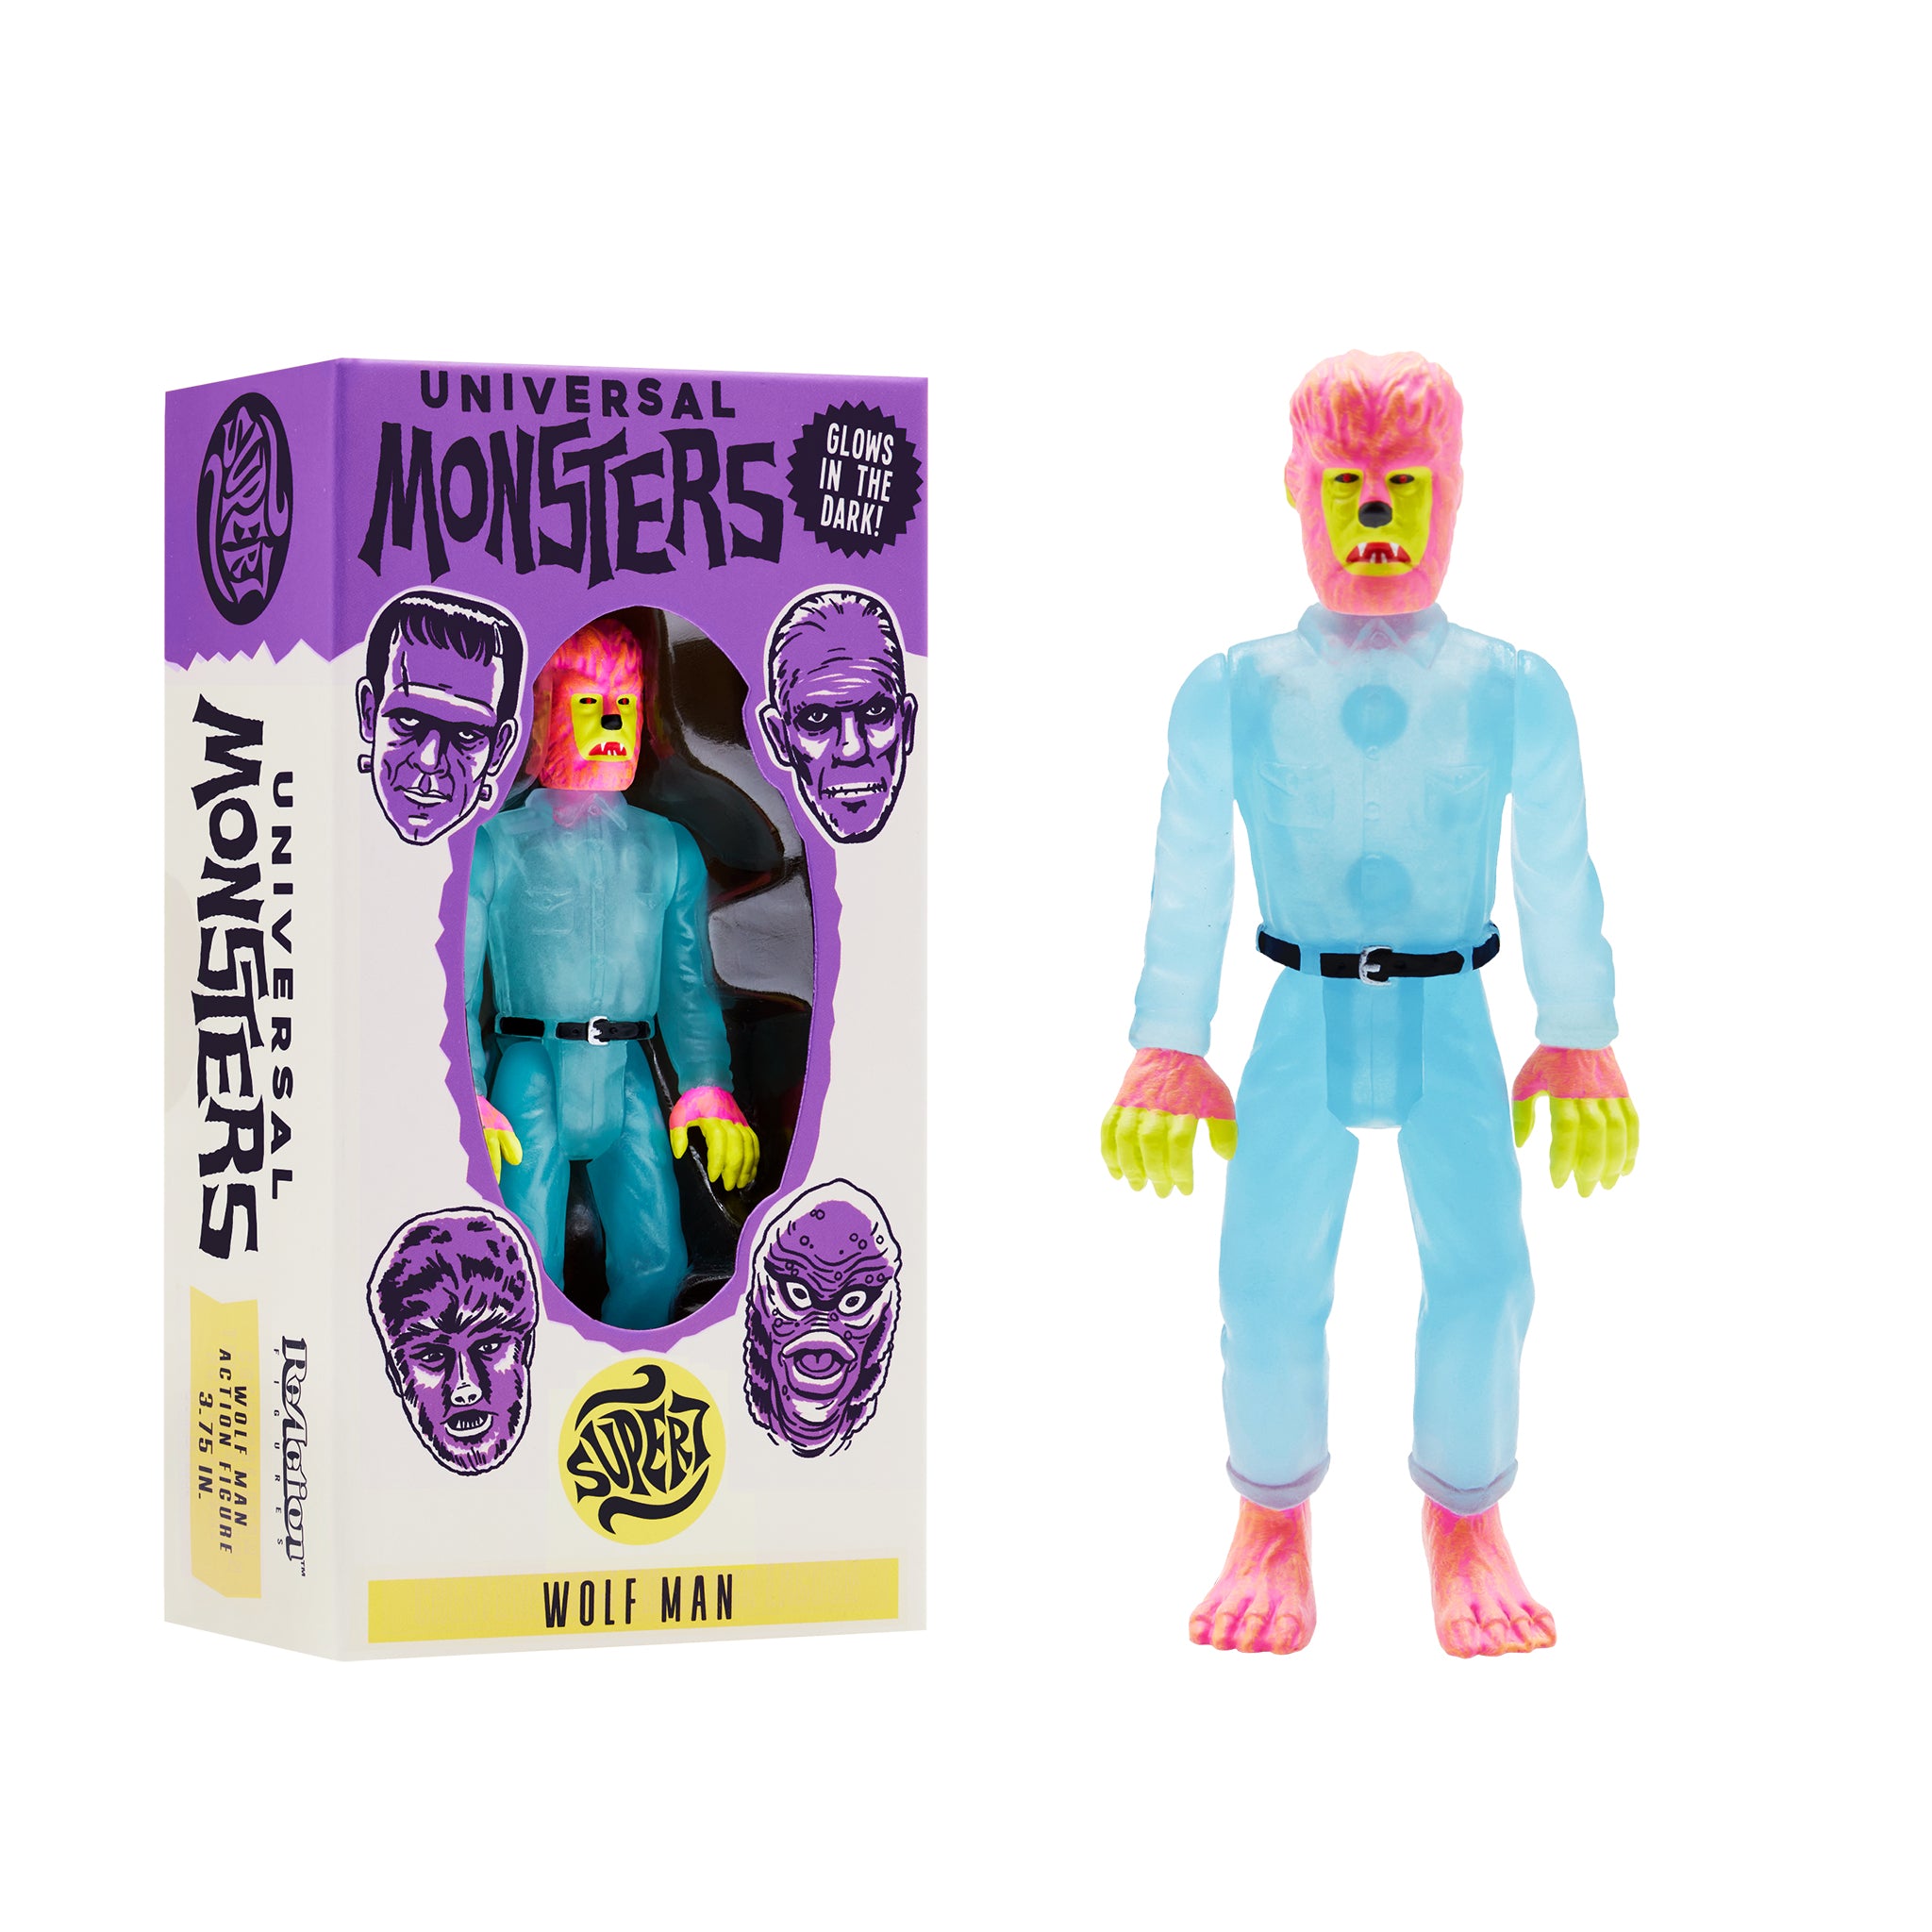 Universal Monsters ReAction - Wolfman (Glow-In-The-Dark Costume Colors)